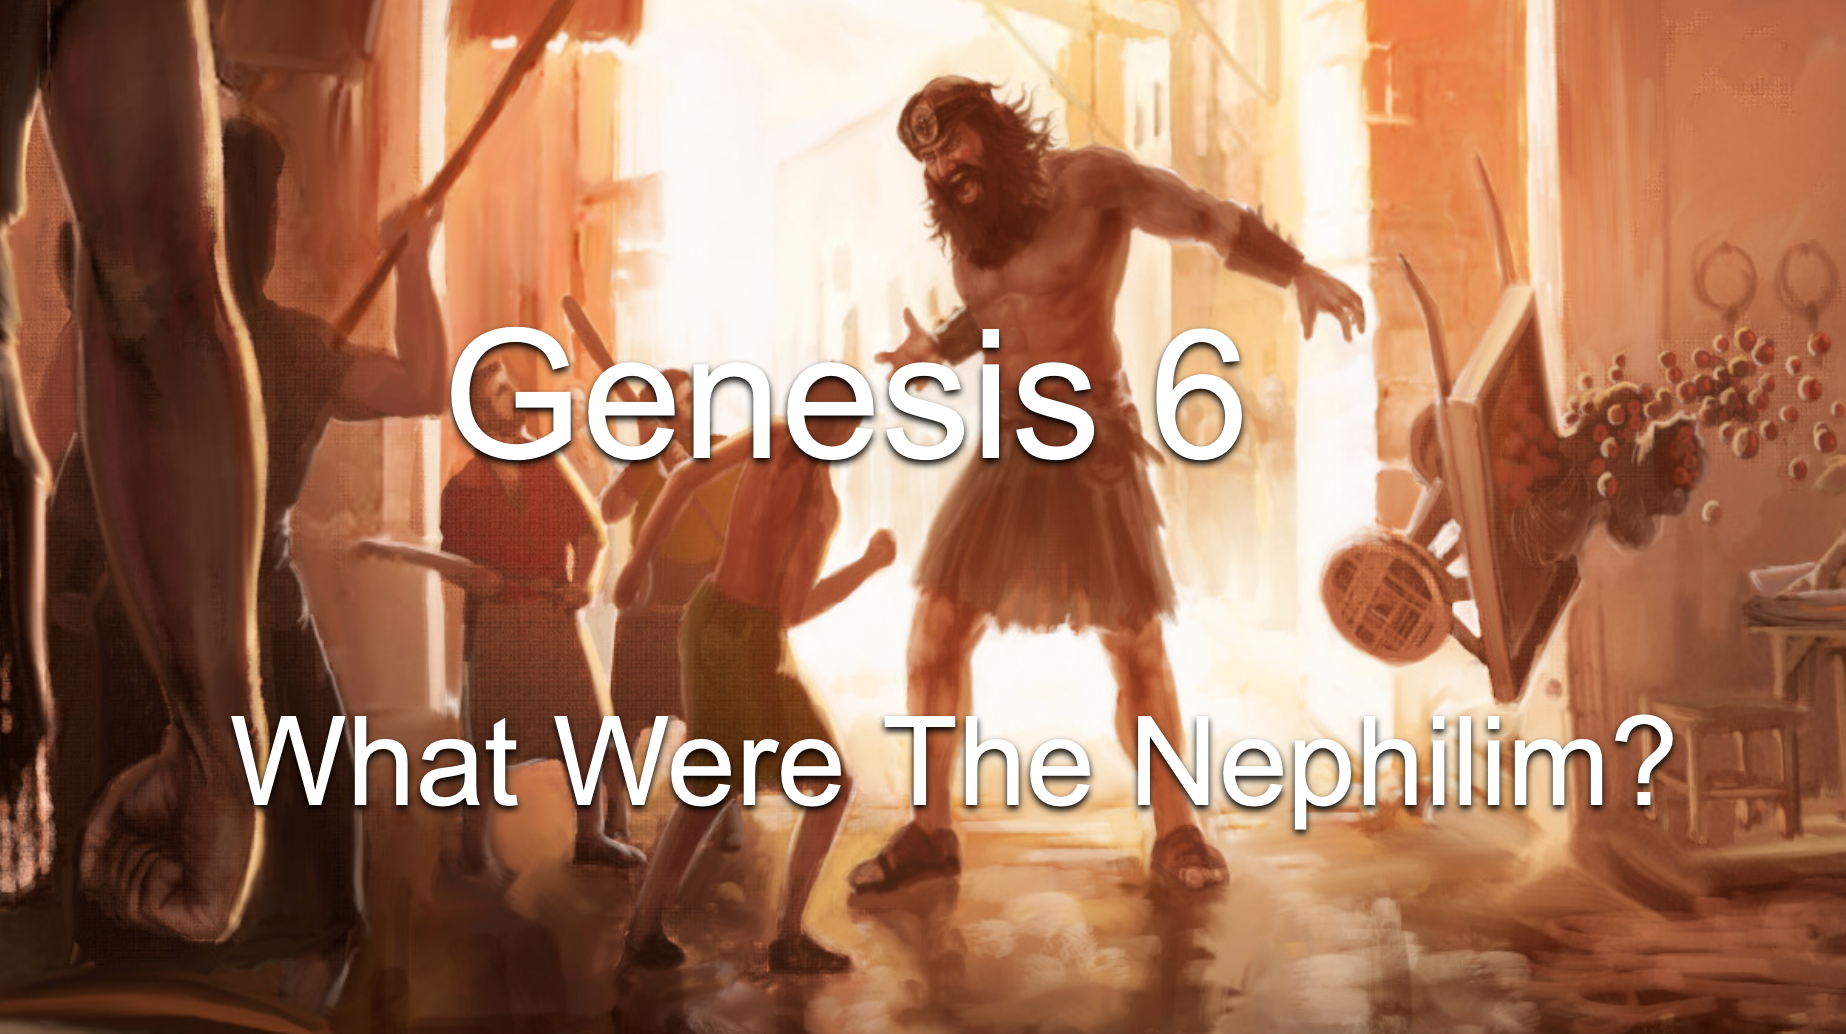 Genesis 6 - What Were The Nephilim?